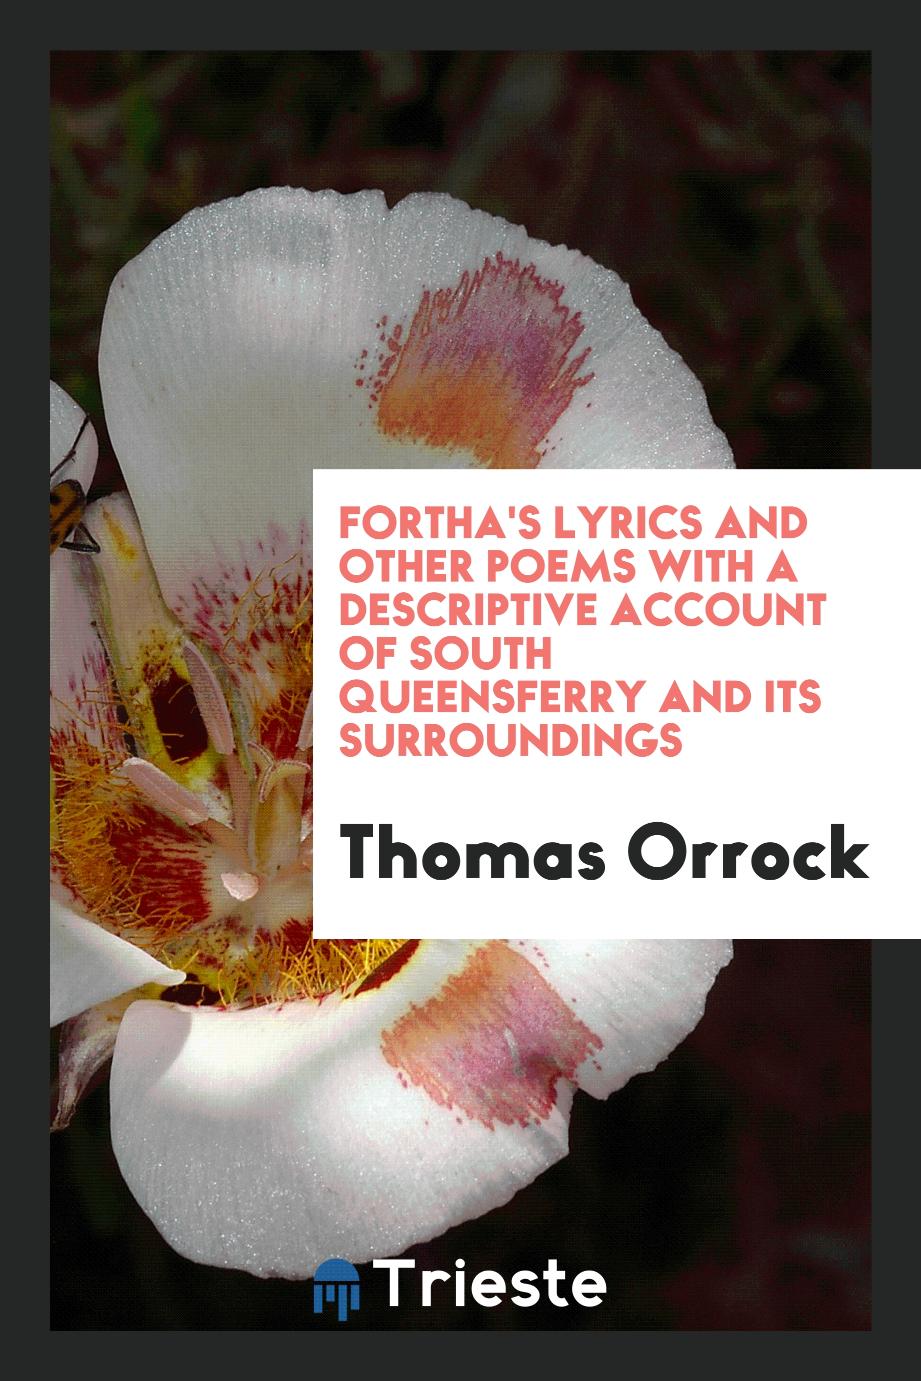 Fortha's Lyrics and Other Poems with a Descriptive Account of South Queensferry and Its Surroundings